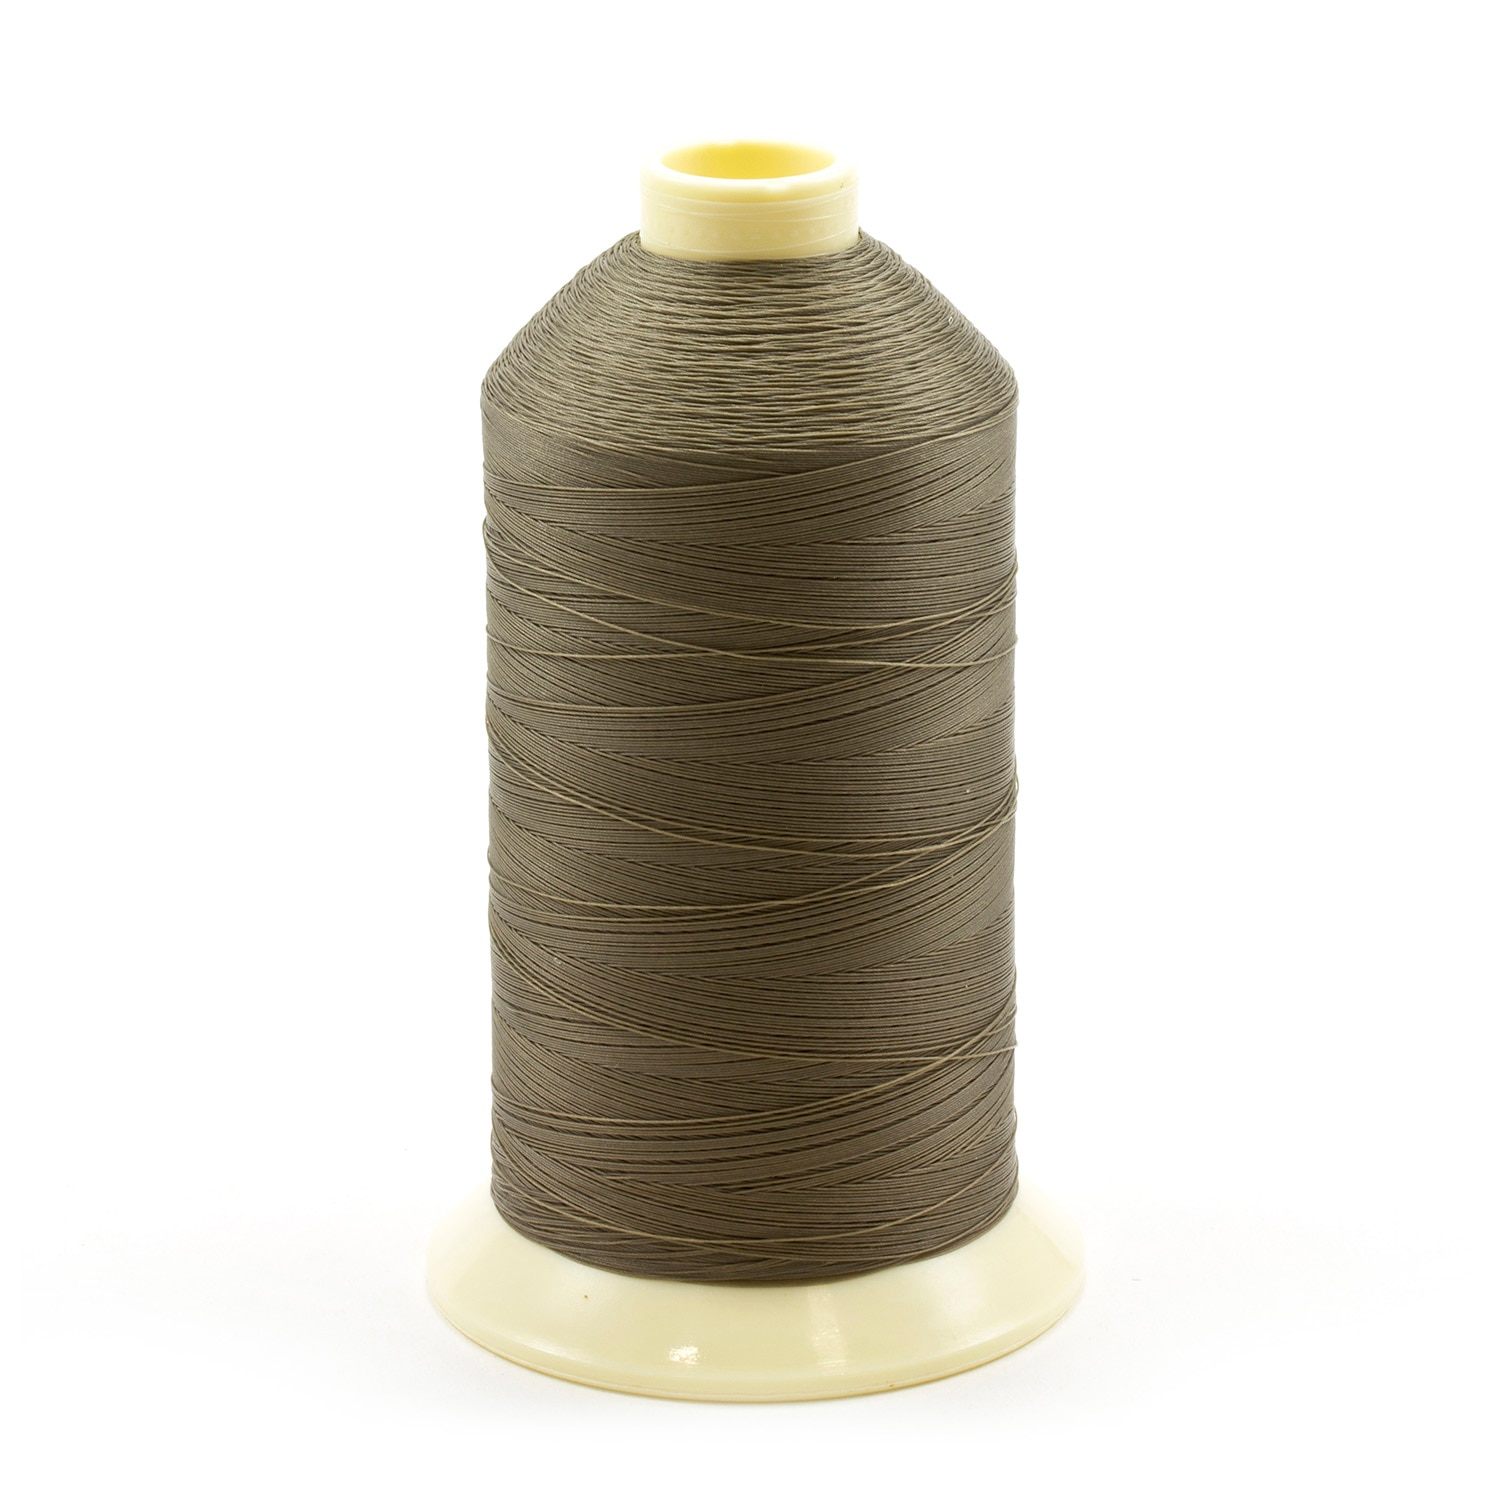 Exquisite® Polyester Thread - 447 Peacock 1000 Meters